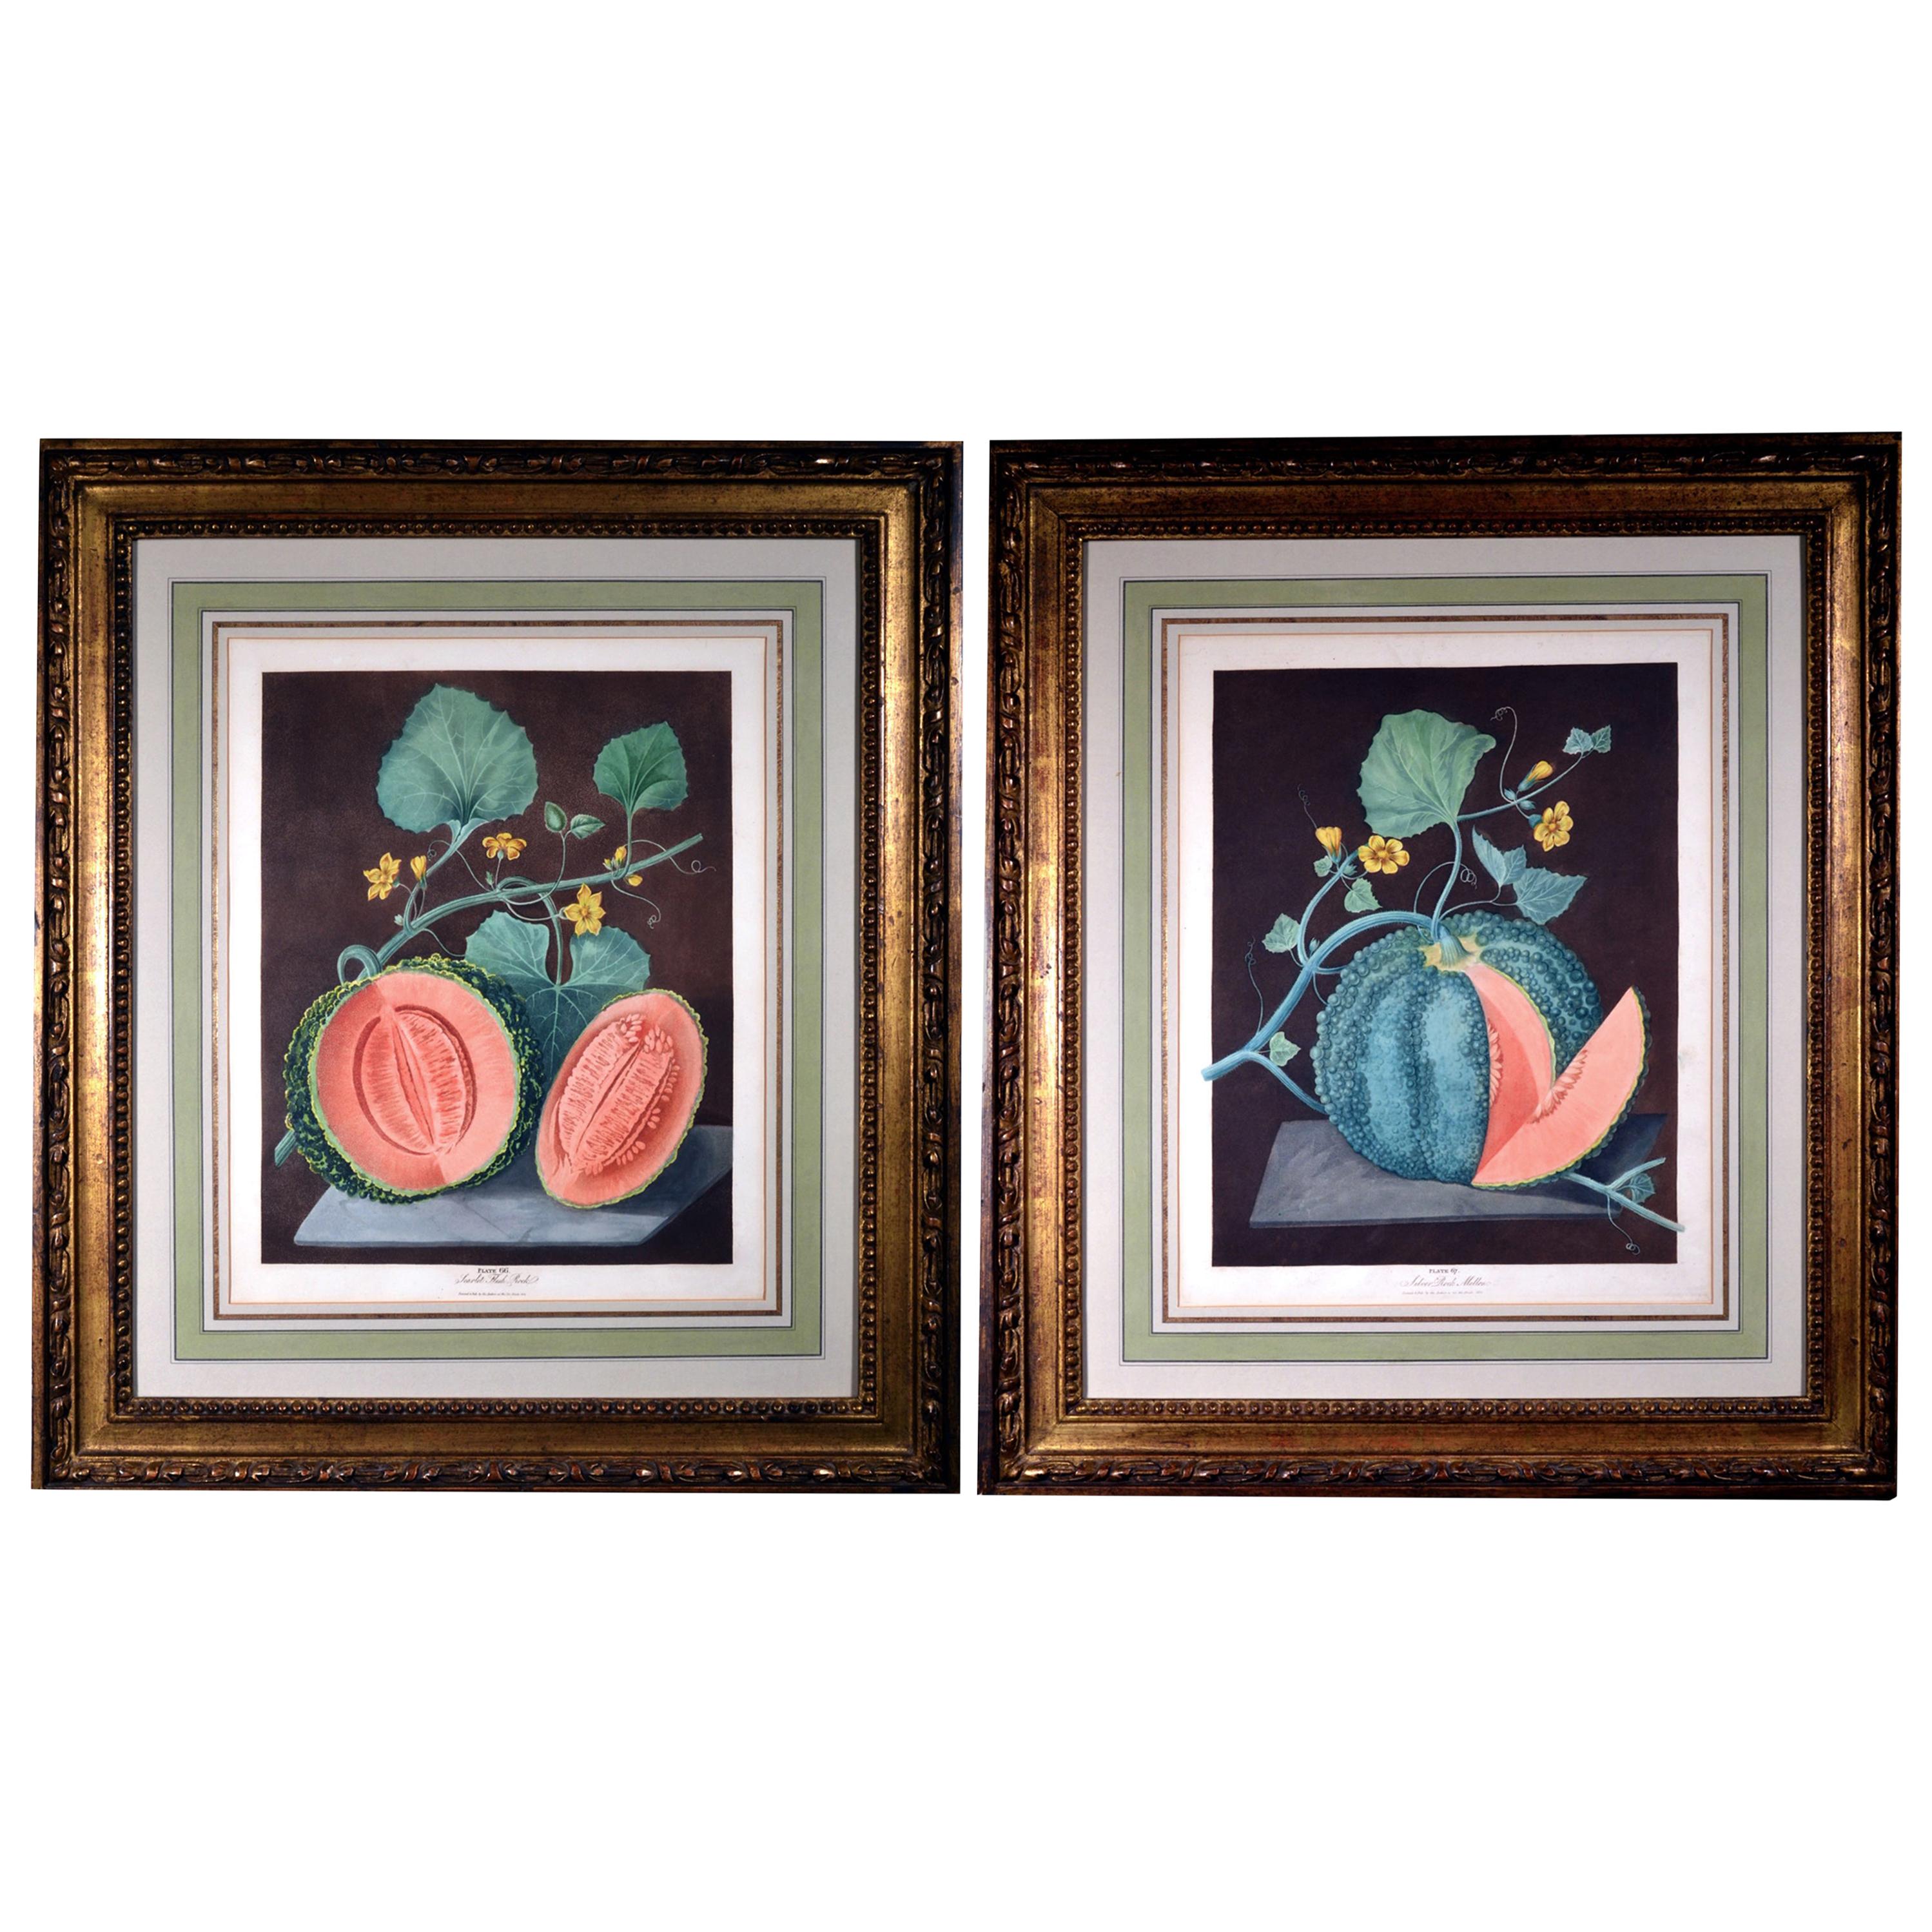 George Brookshaw Pair of Engravings of Melons, Plates 66 and 67